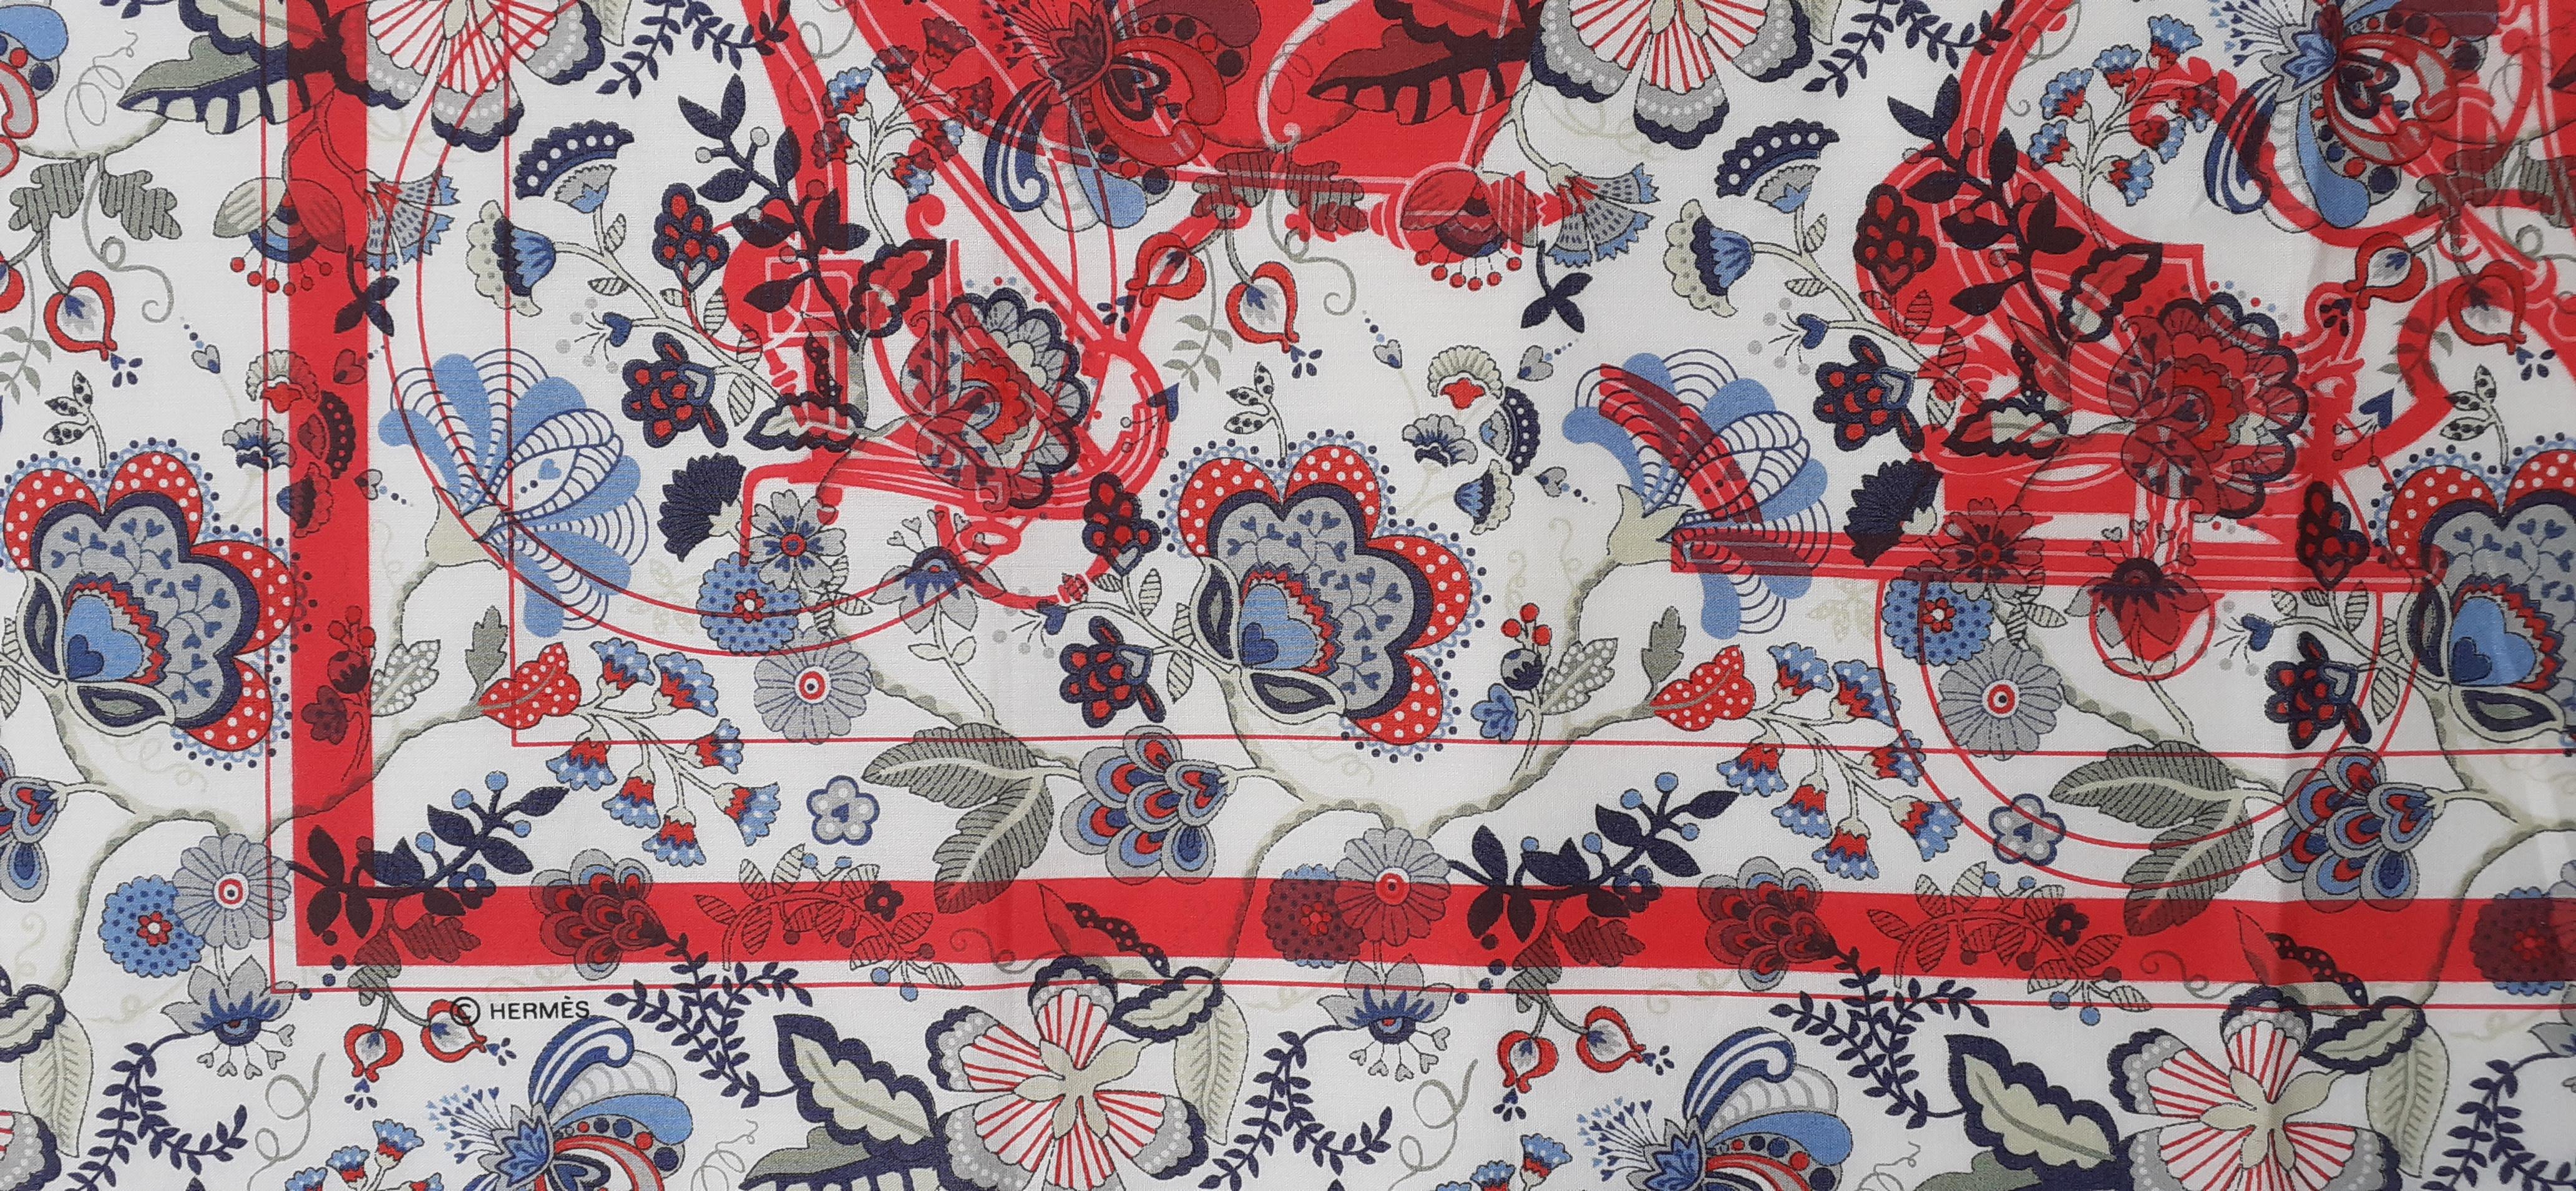 Hermès For Liberty Cotton Scarf Ex Libris and Flowers 26' Limited Edition 3